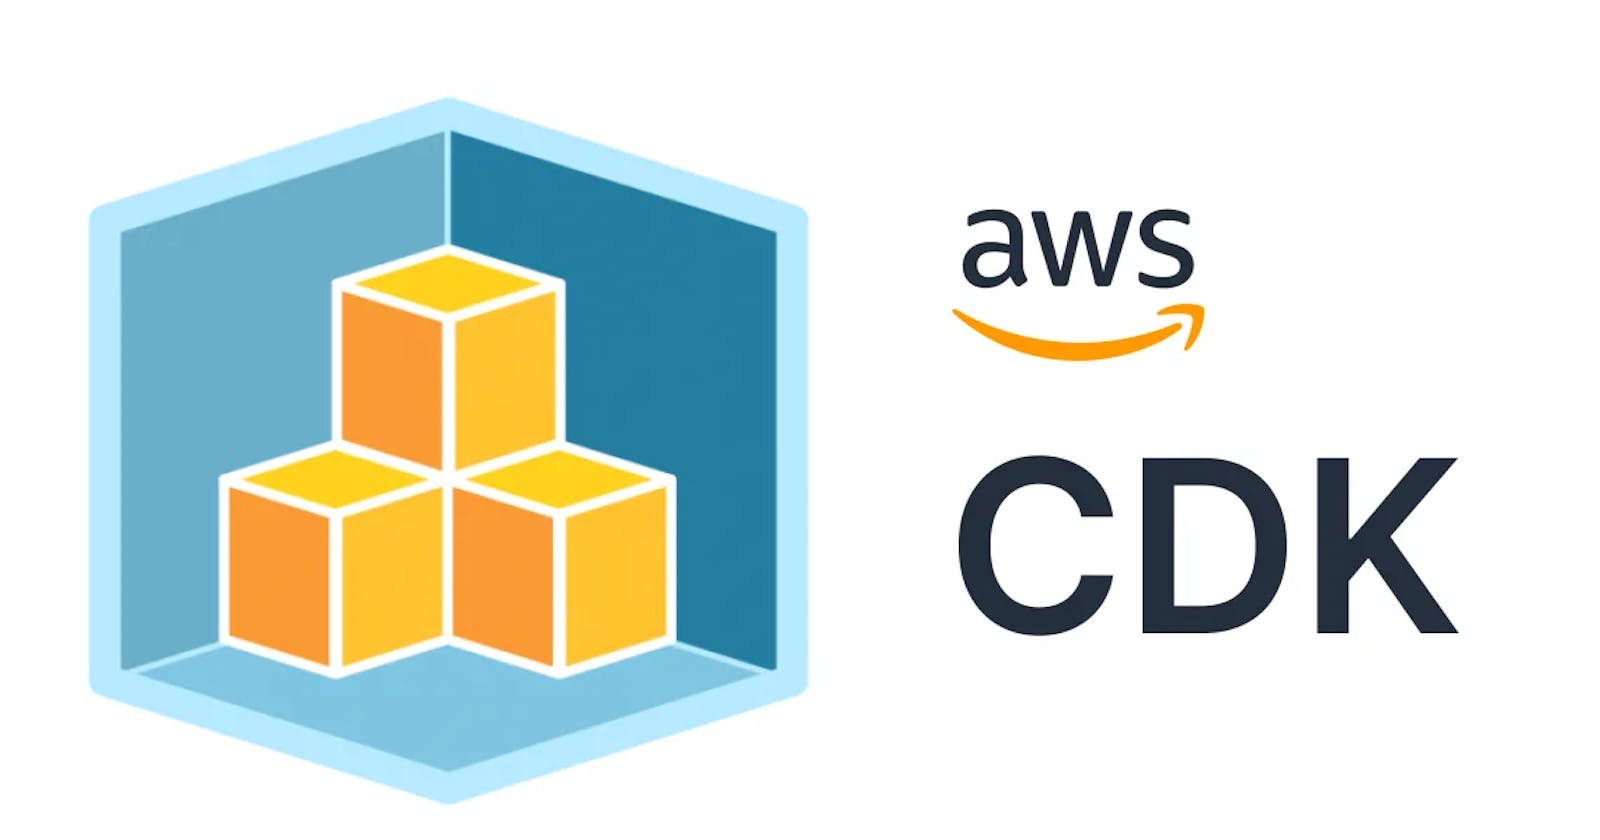 How to List Stacks in AWS CDK